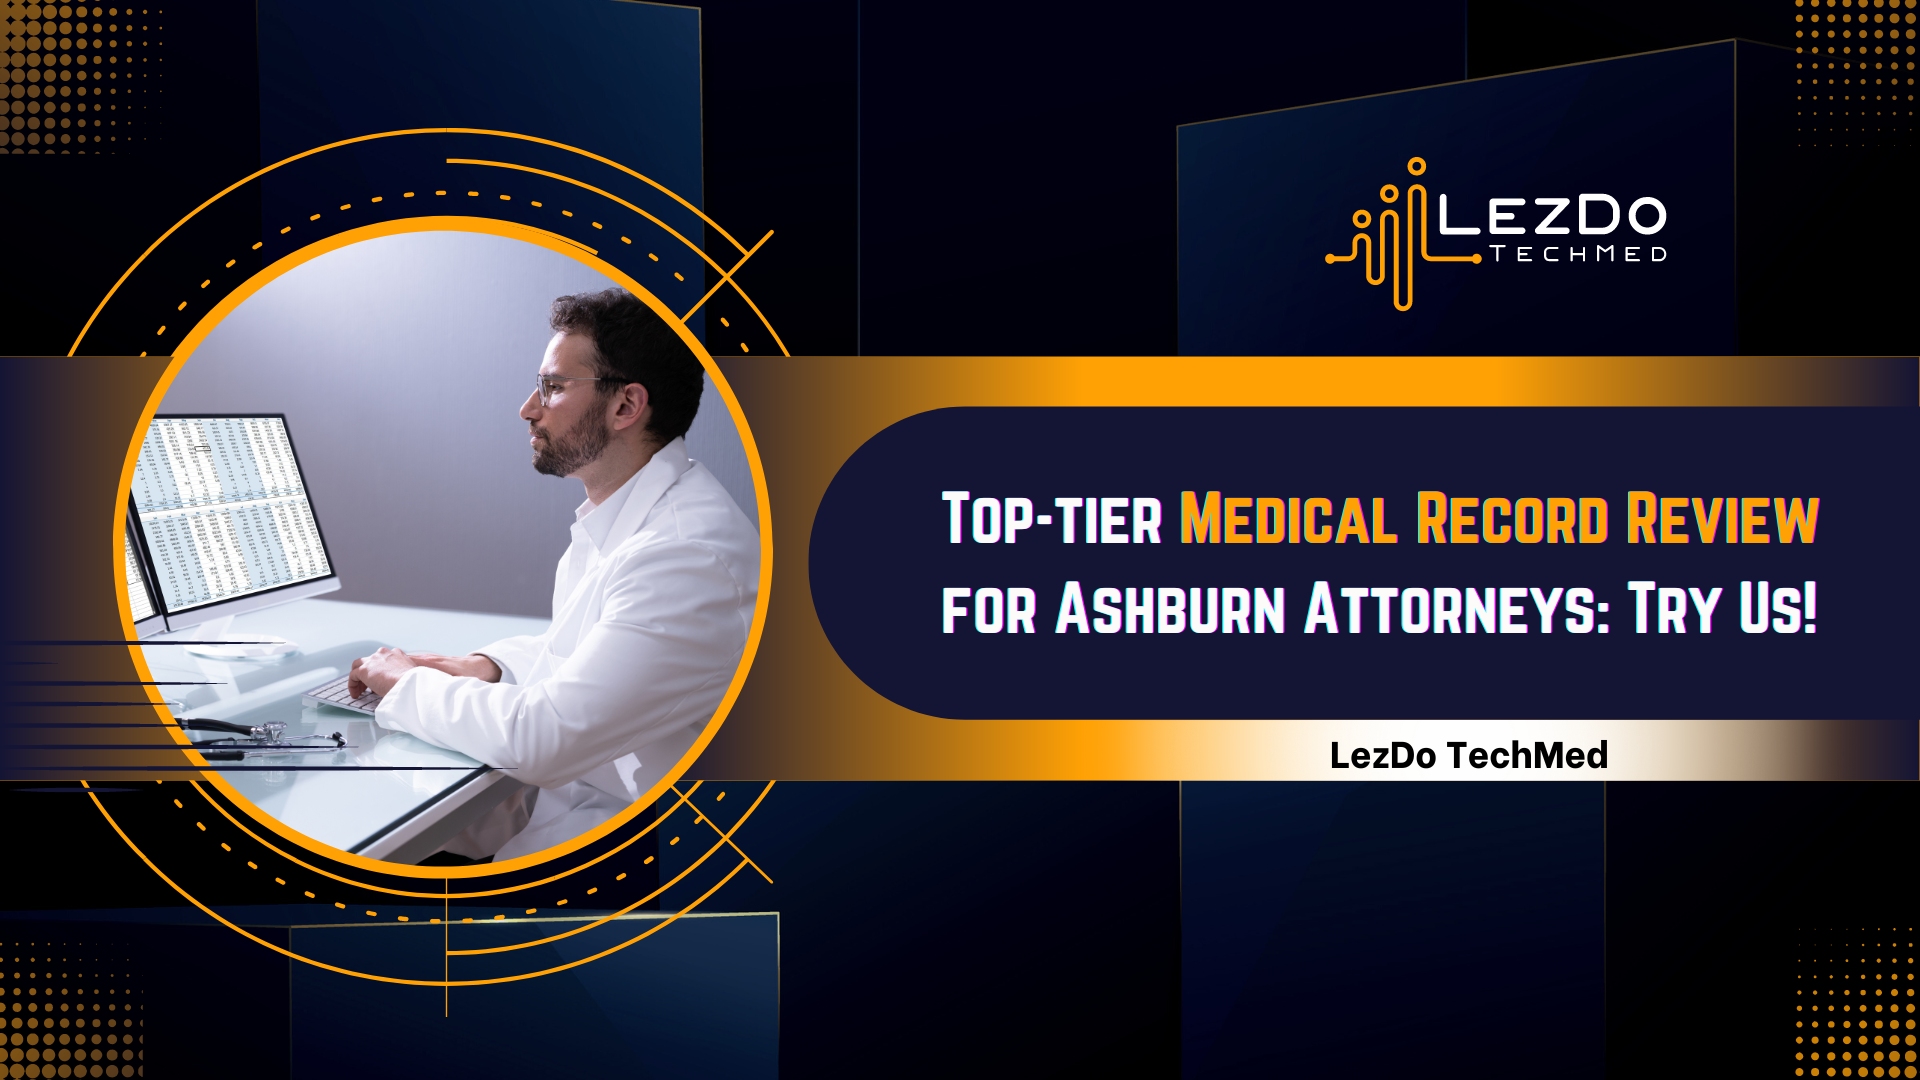 Top-tier Medical Record Review for Ashburn Attorneys: Try Us!